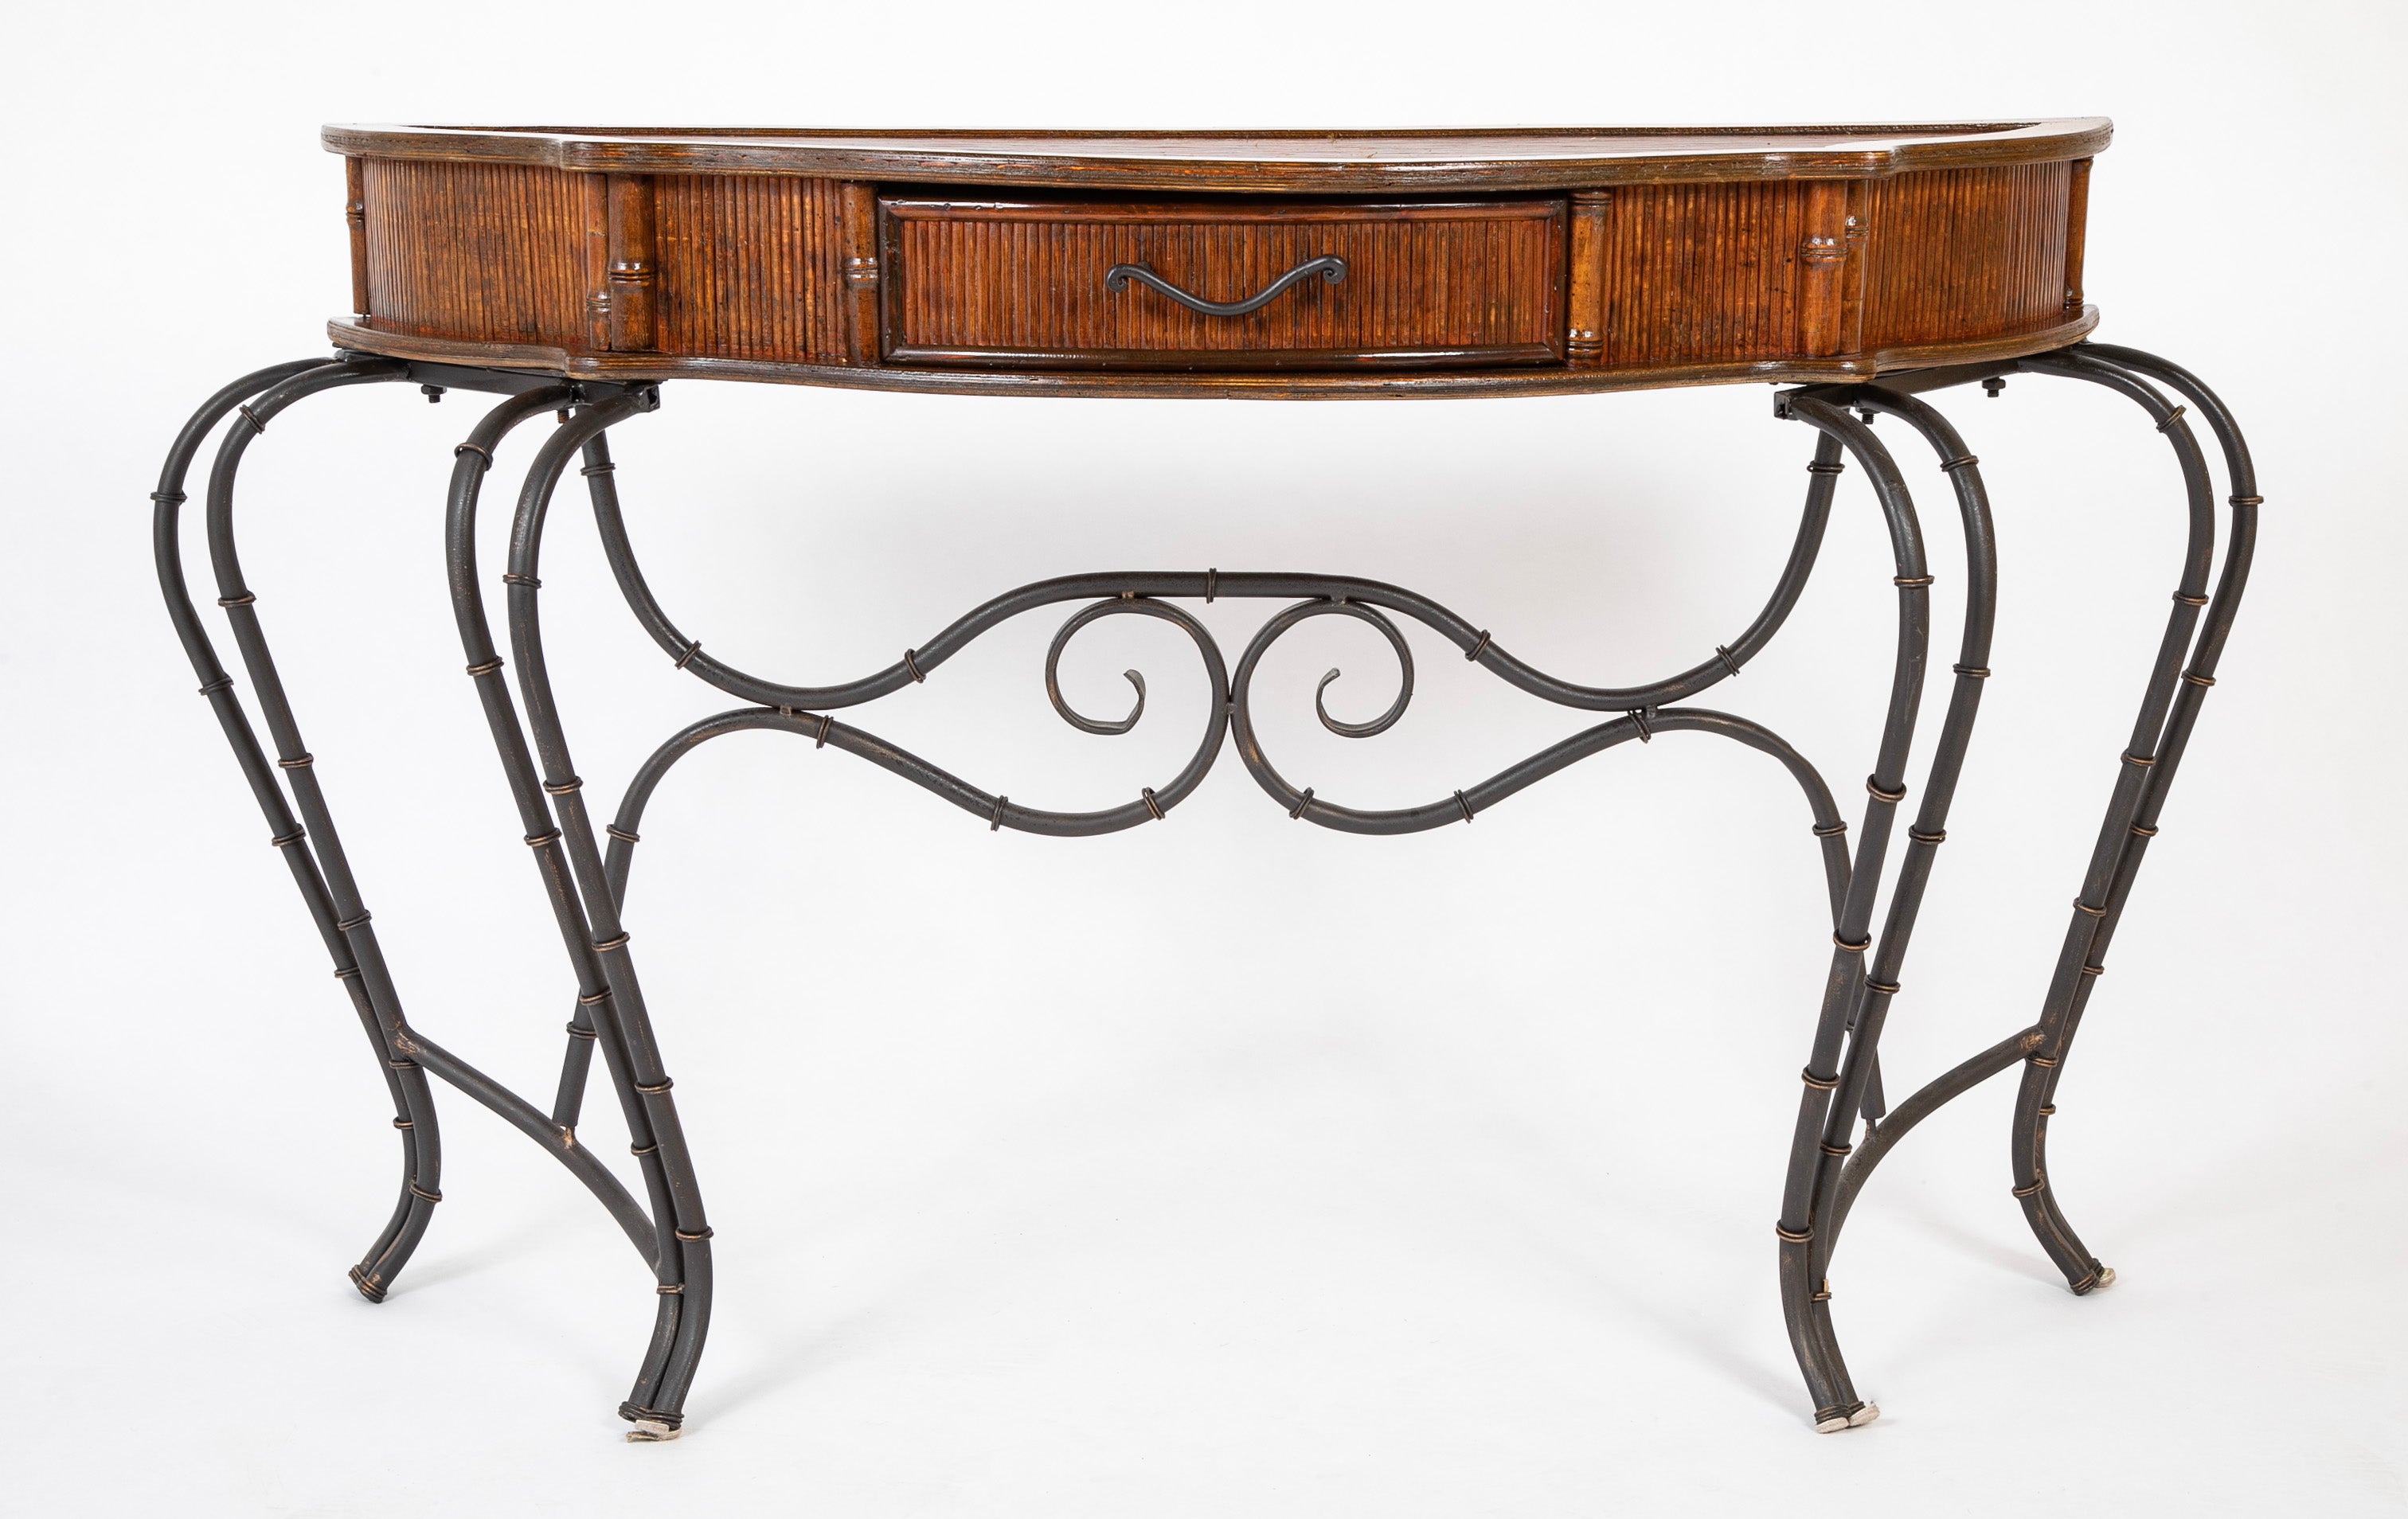 Pair of Bamboo and Fruitwood Serpentine Console Tables